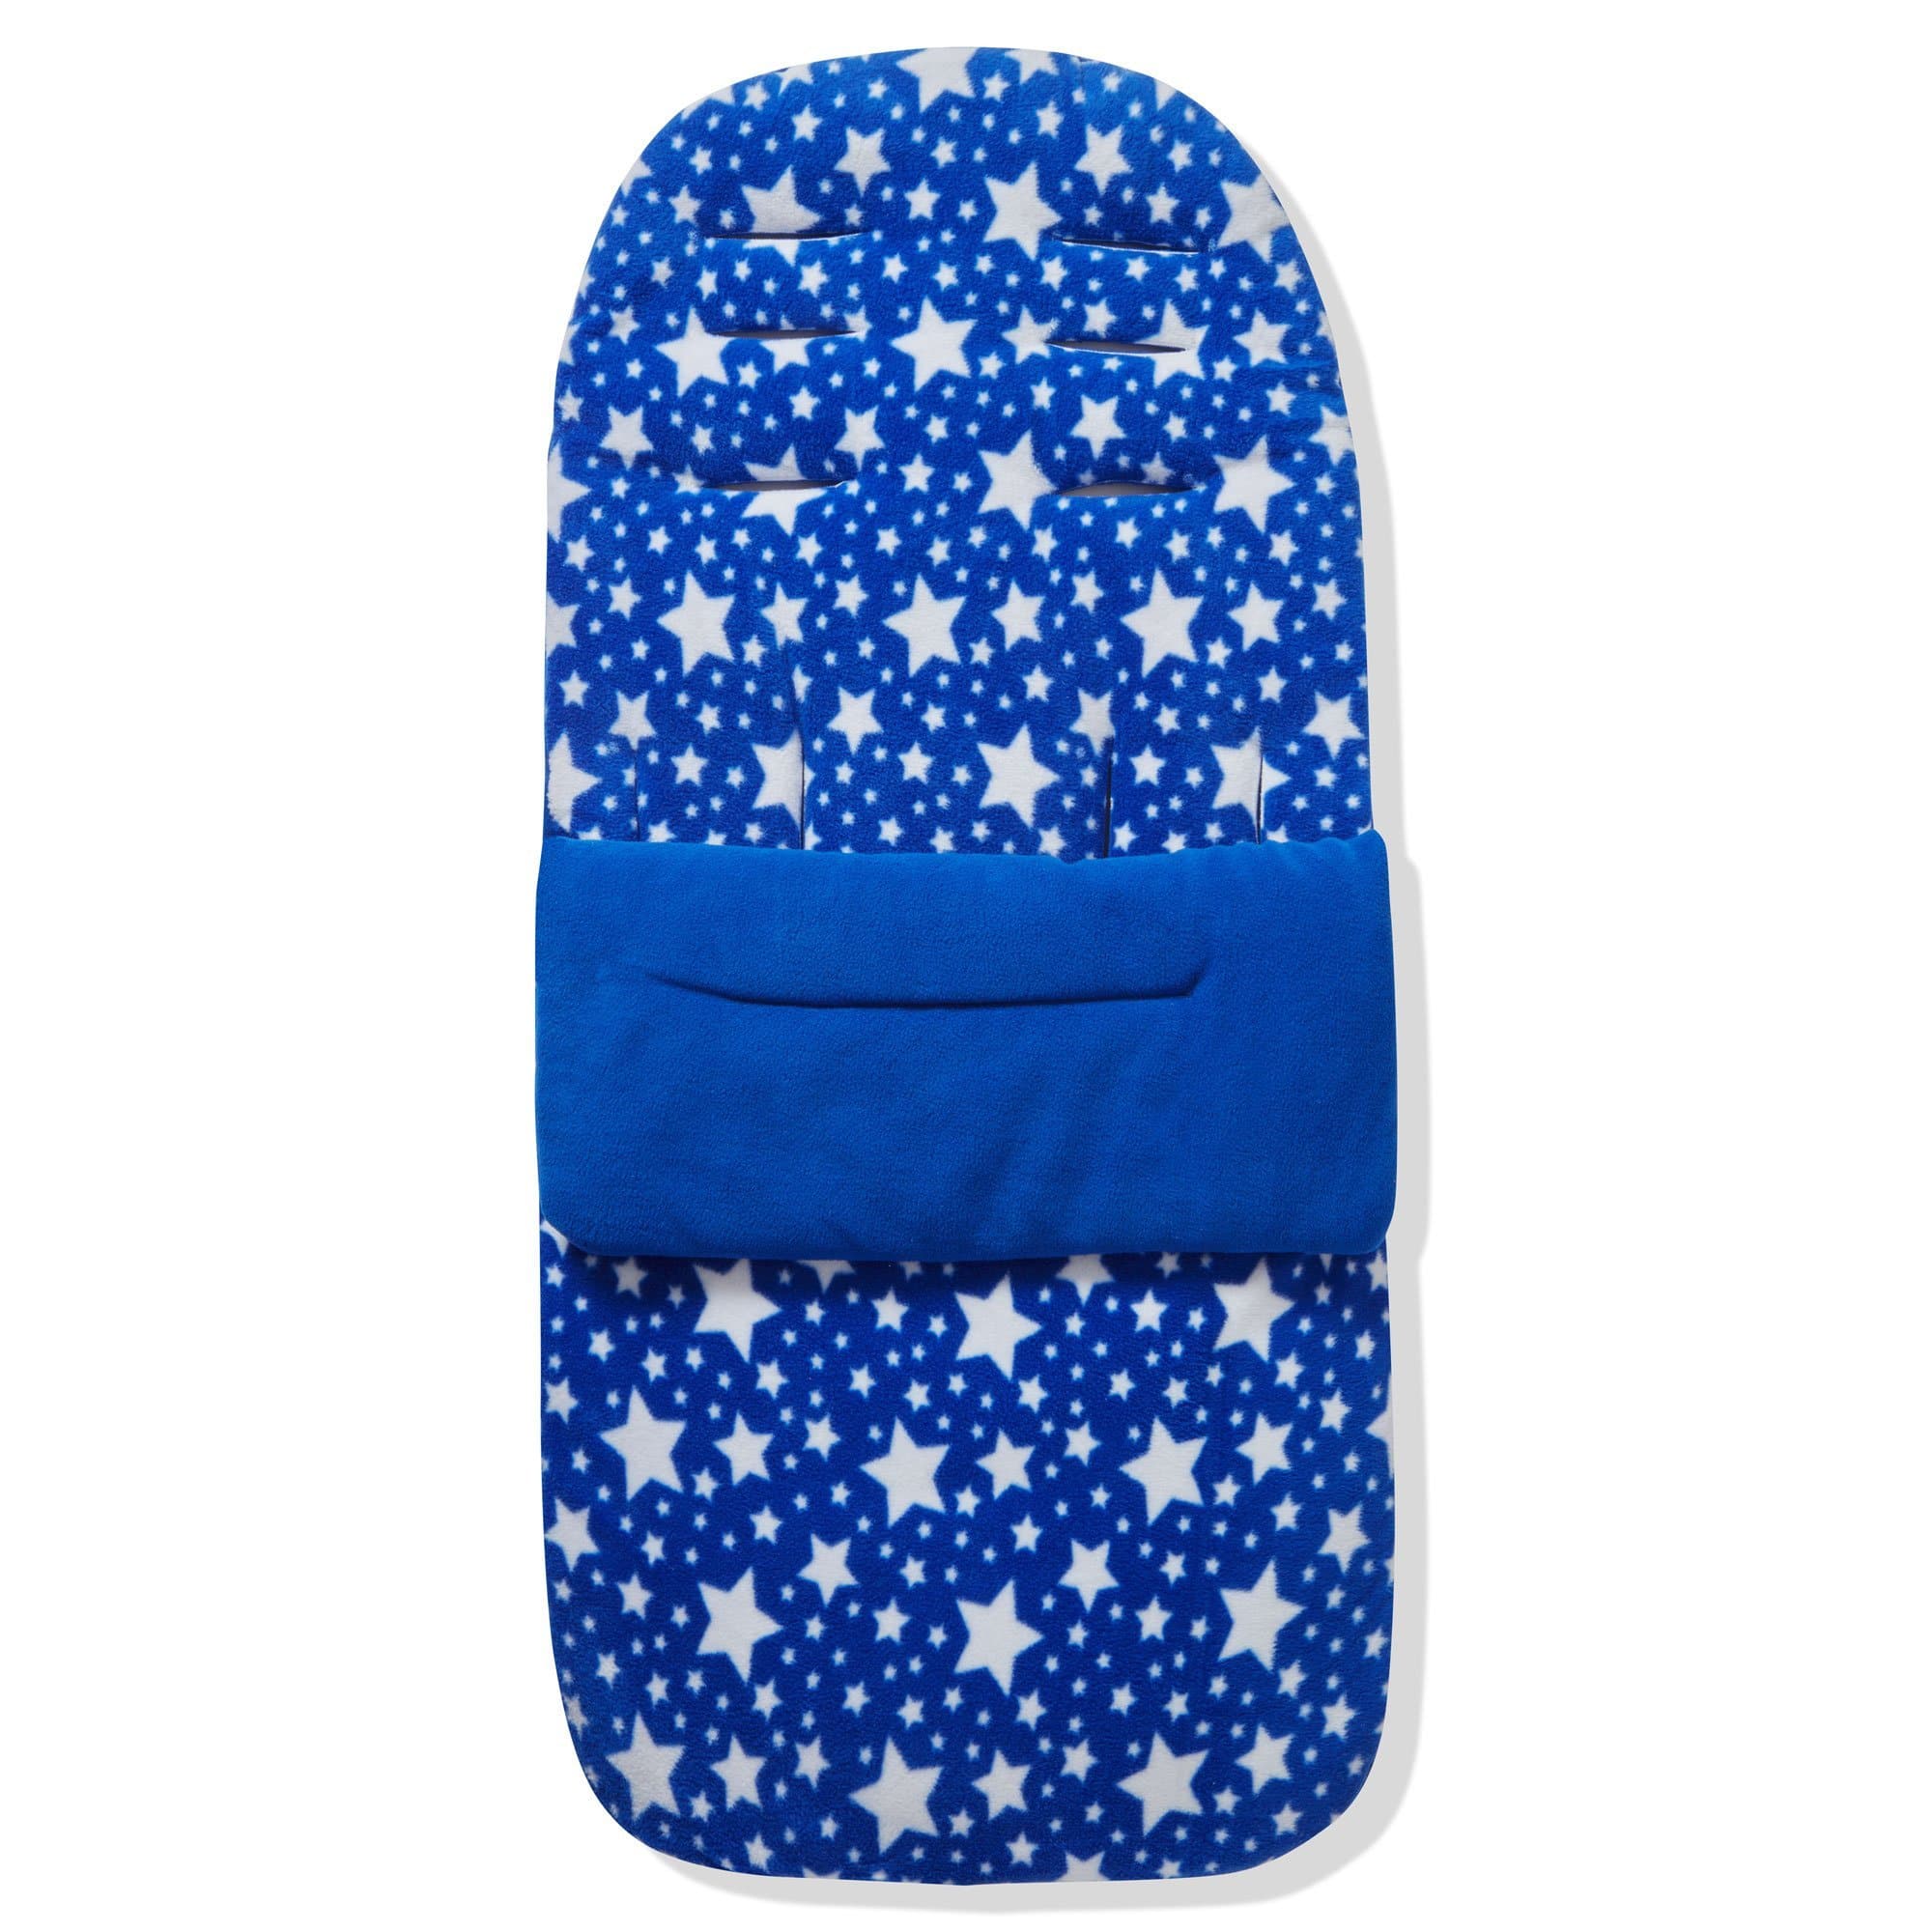 Fleece Footmuff / Cosy Toes Compatible with Bebecar - Blue Star / Fits All Models | For Your Little One